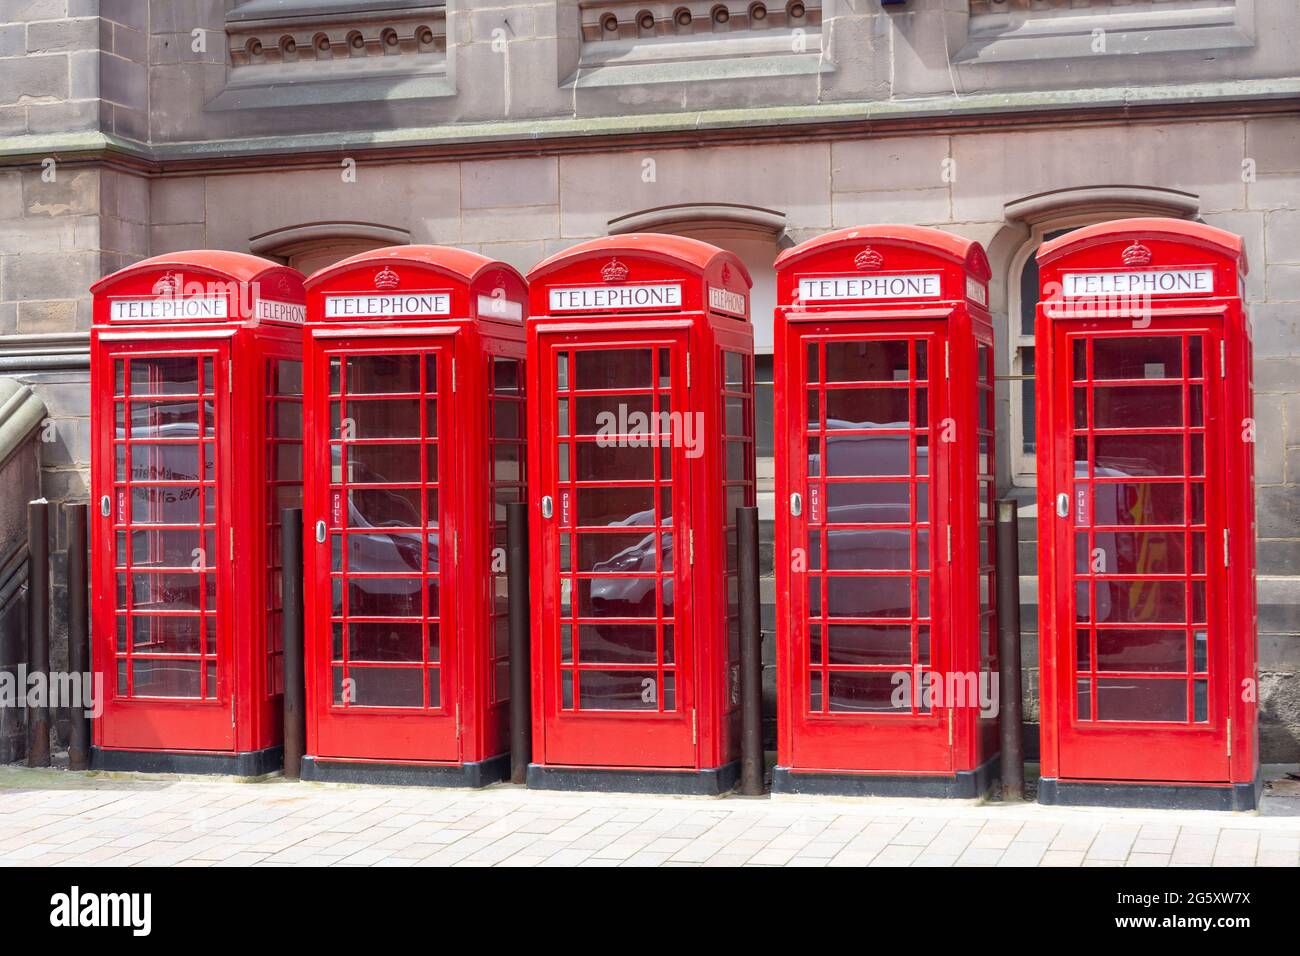 Row of red telephone boxes, Dunning Street, Middlesbrough, North Yorkshire, England, United Kingdom Stock Photo